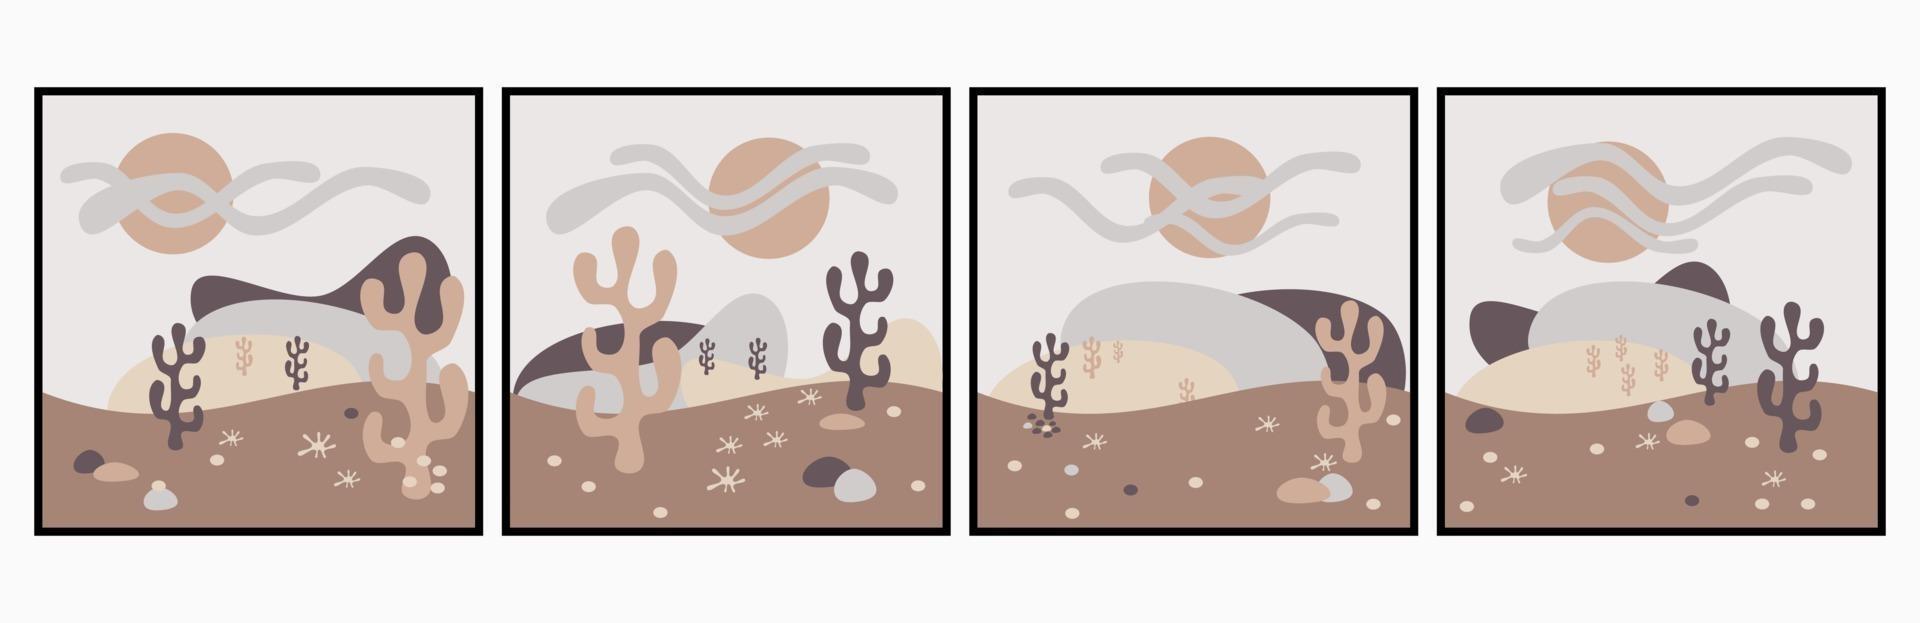 set of four wall decor with desert scenes vector